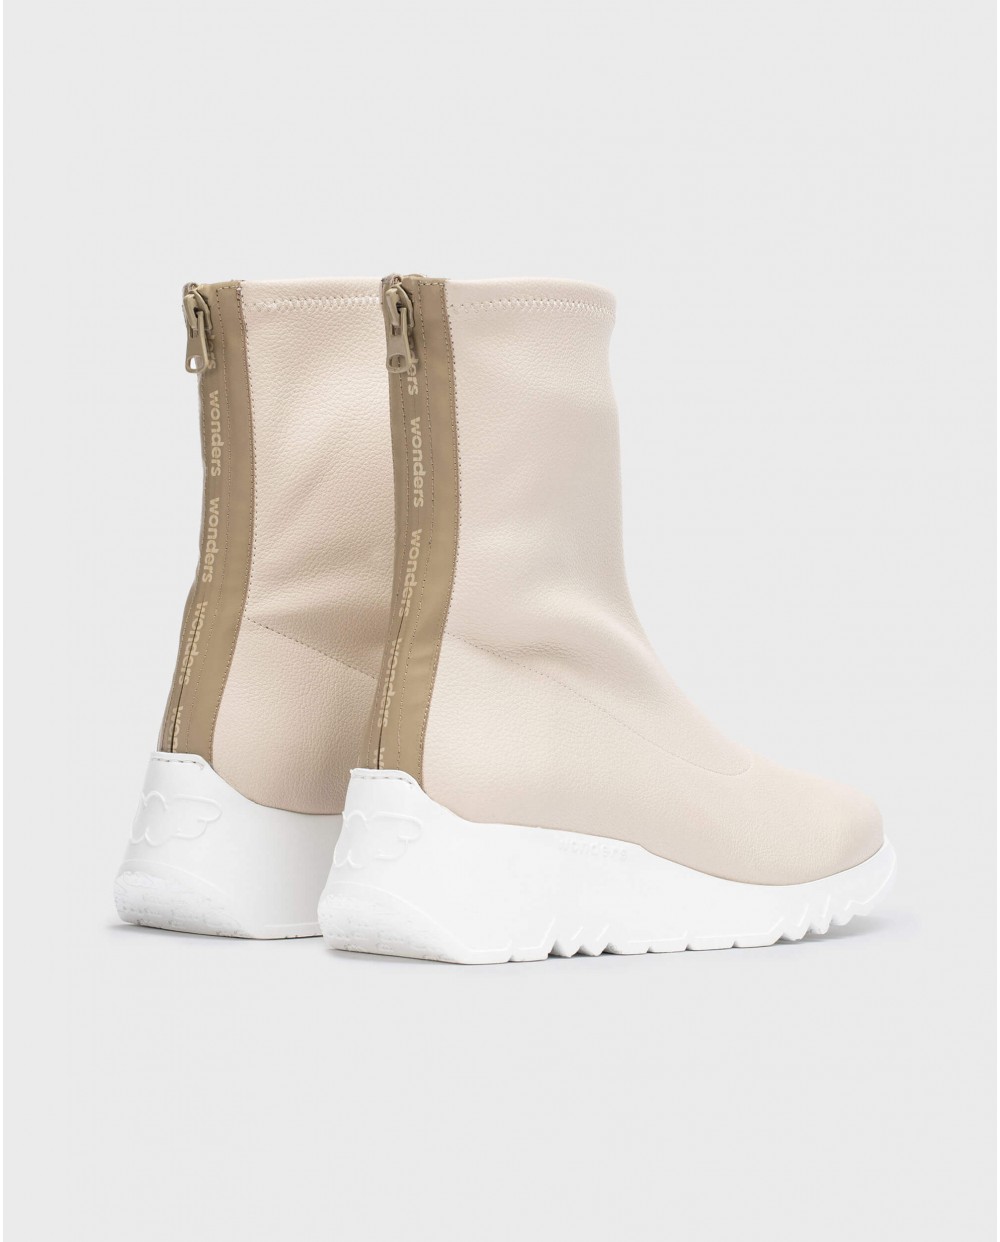 Wonders-Ankle Boots-Cream TAZY ankle boot